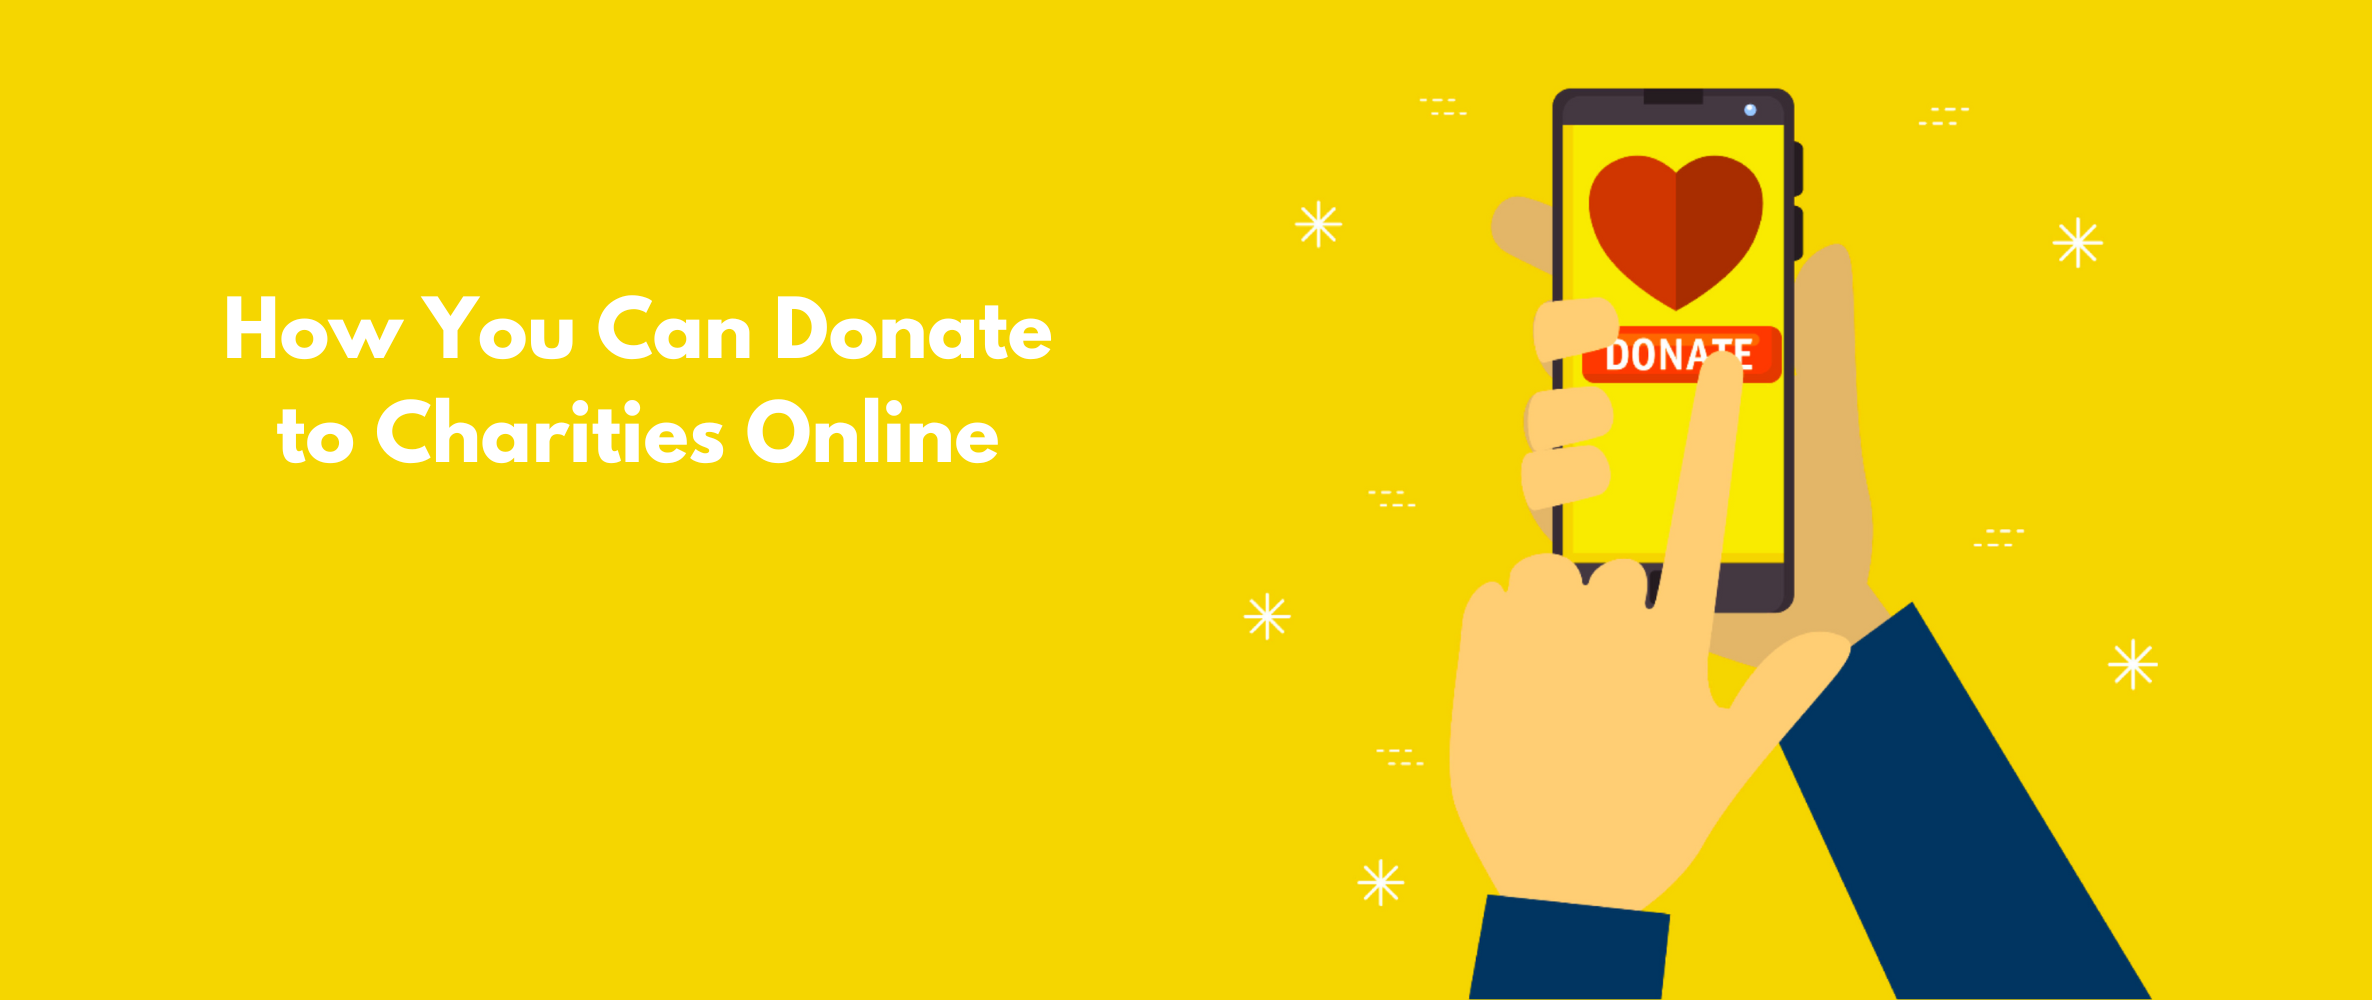 How You Can Donate to Charities Online